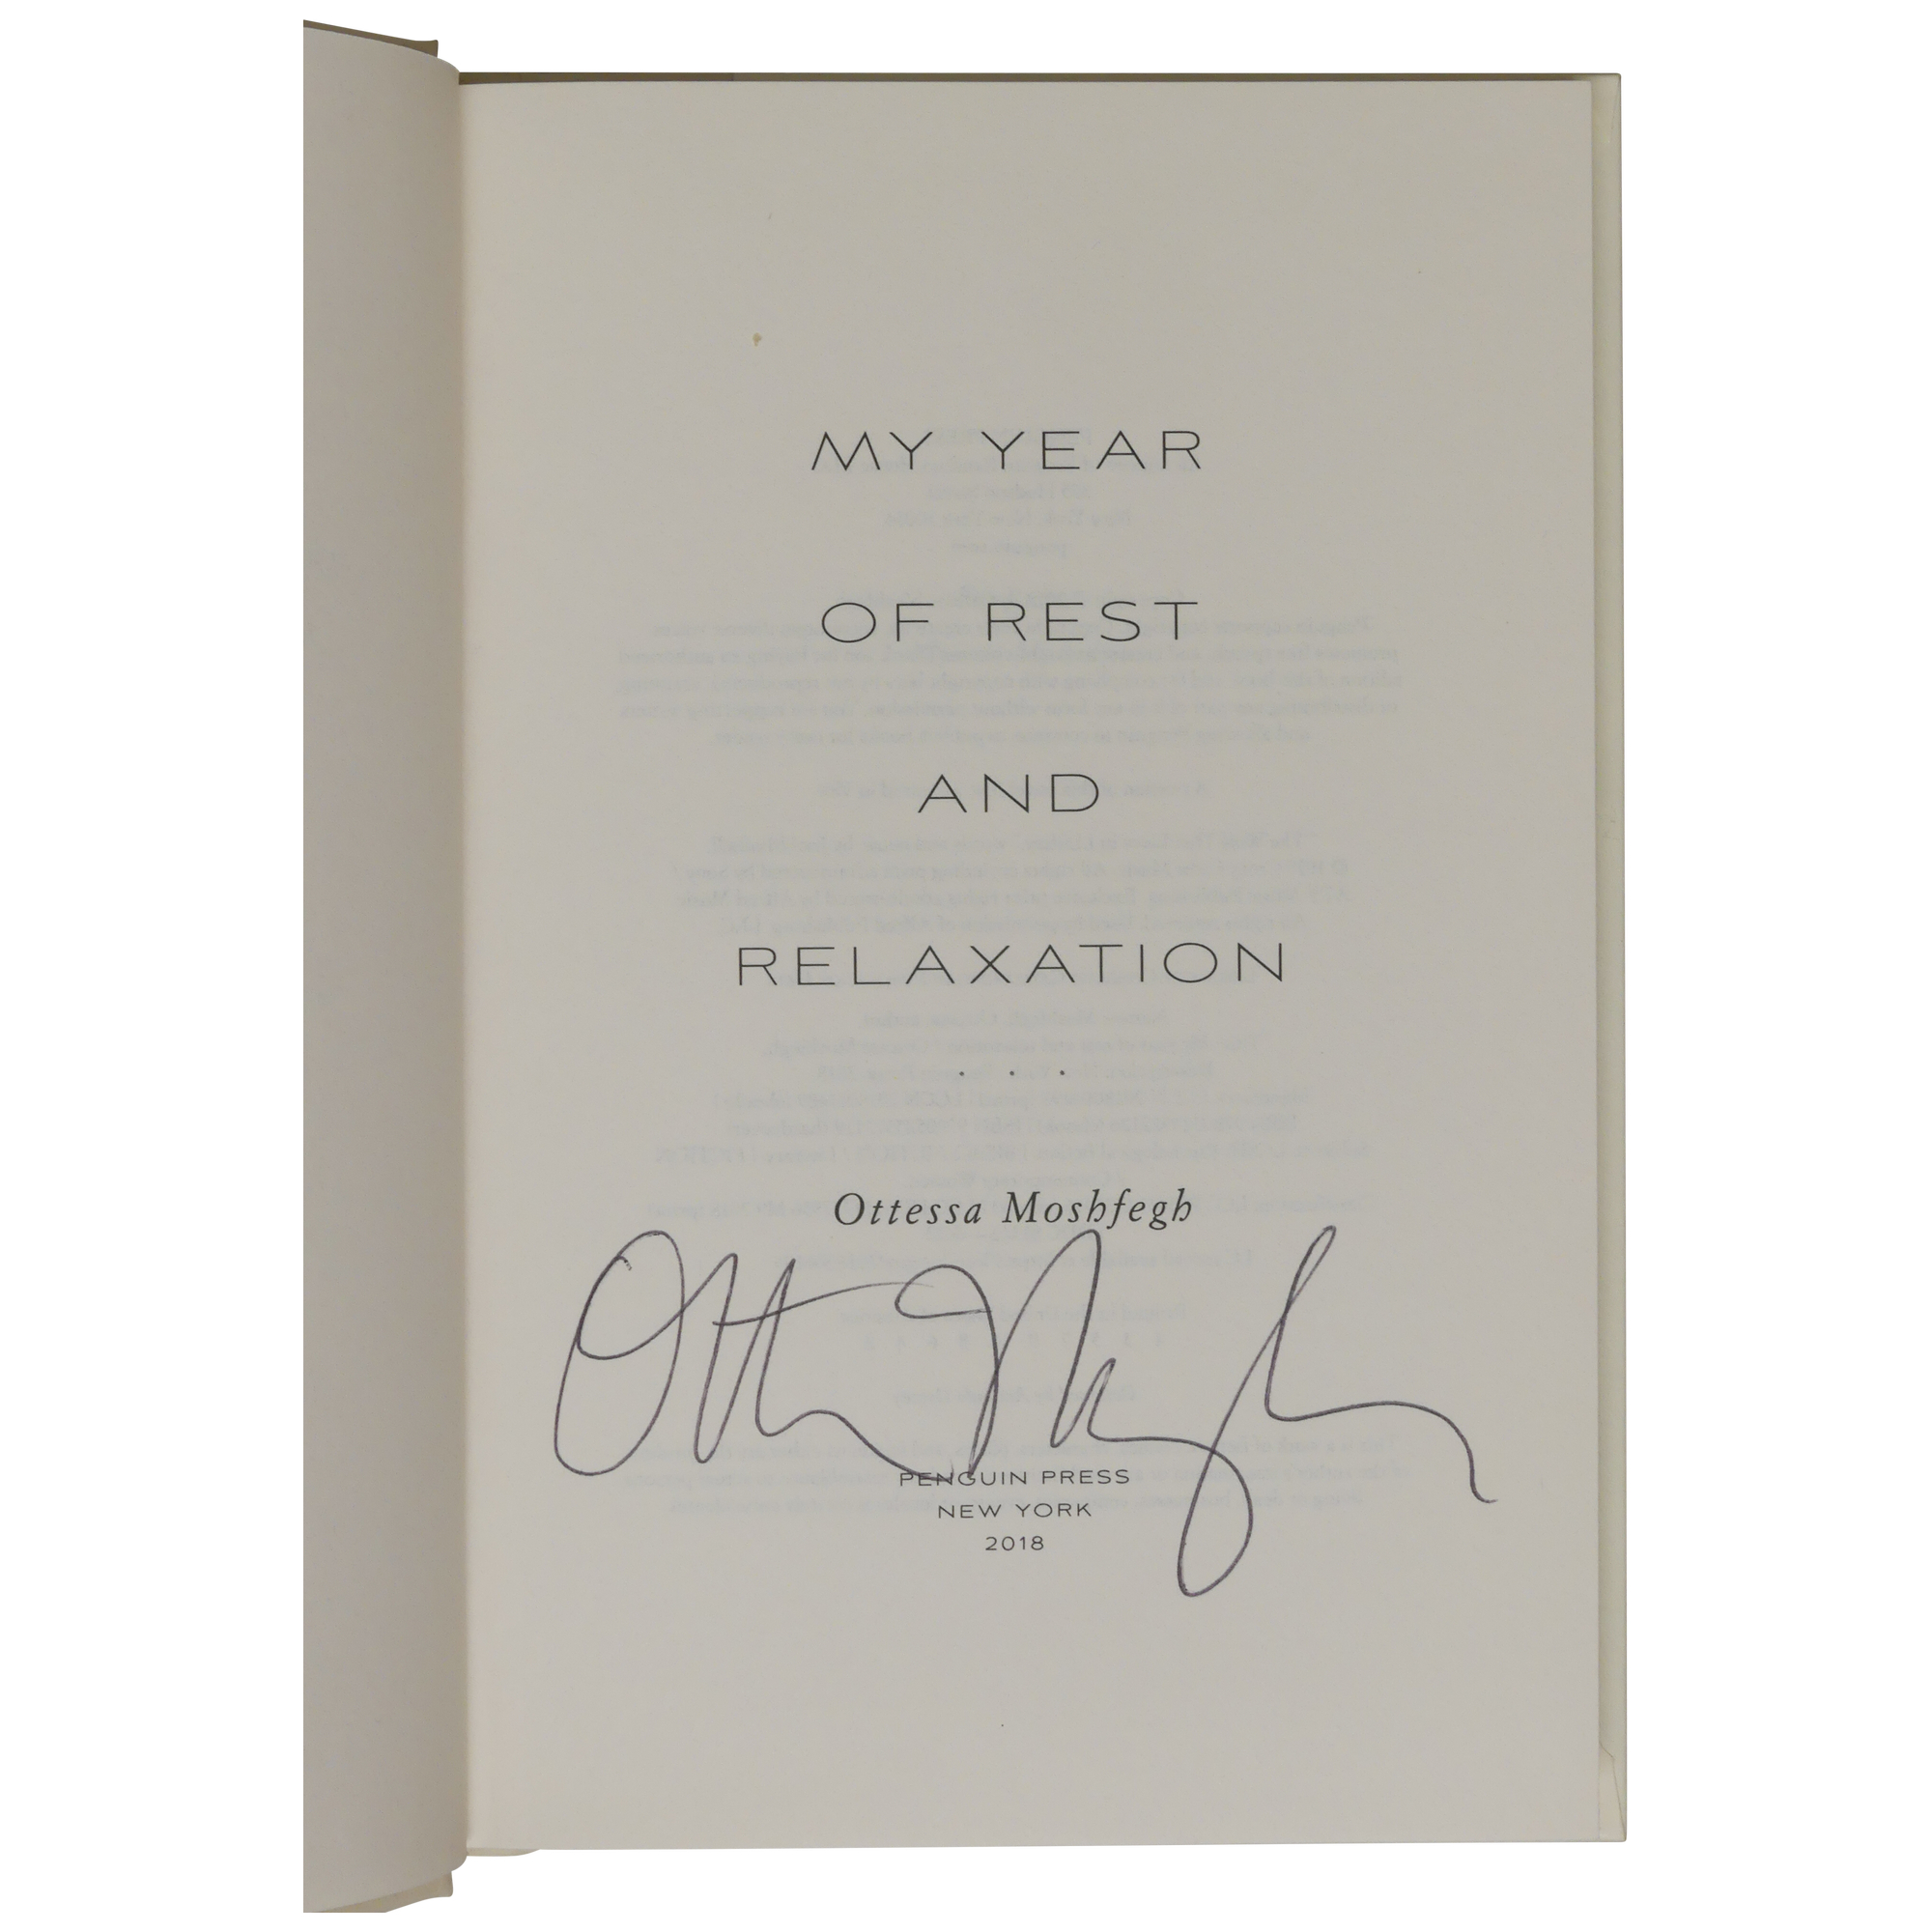 My Year of Rest and Relaxation by Ottessa Moshfegh - Penguin Books